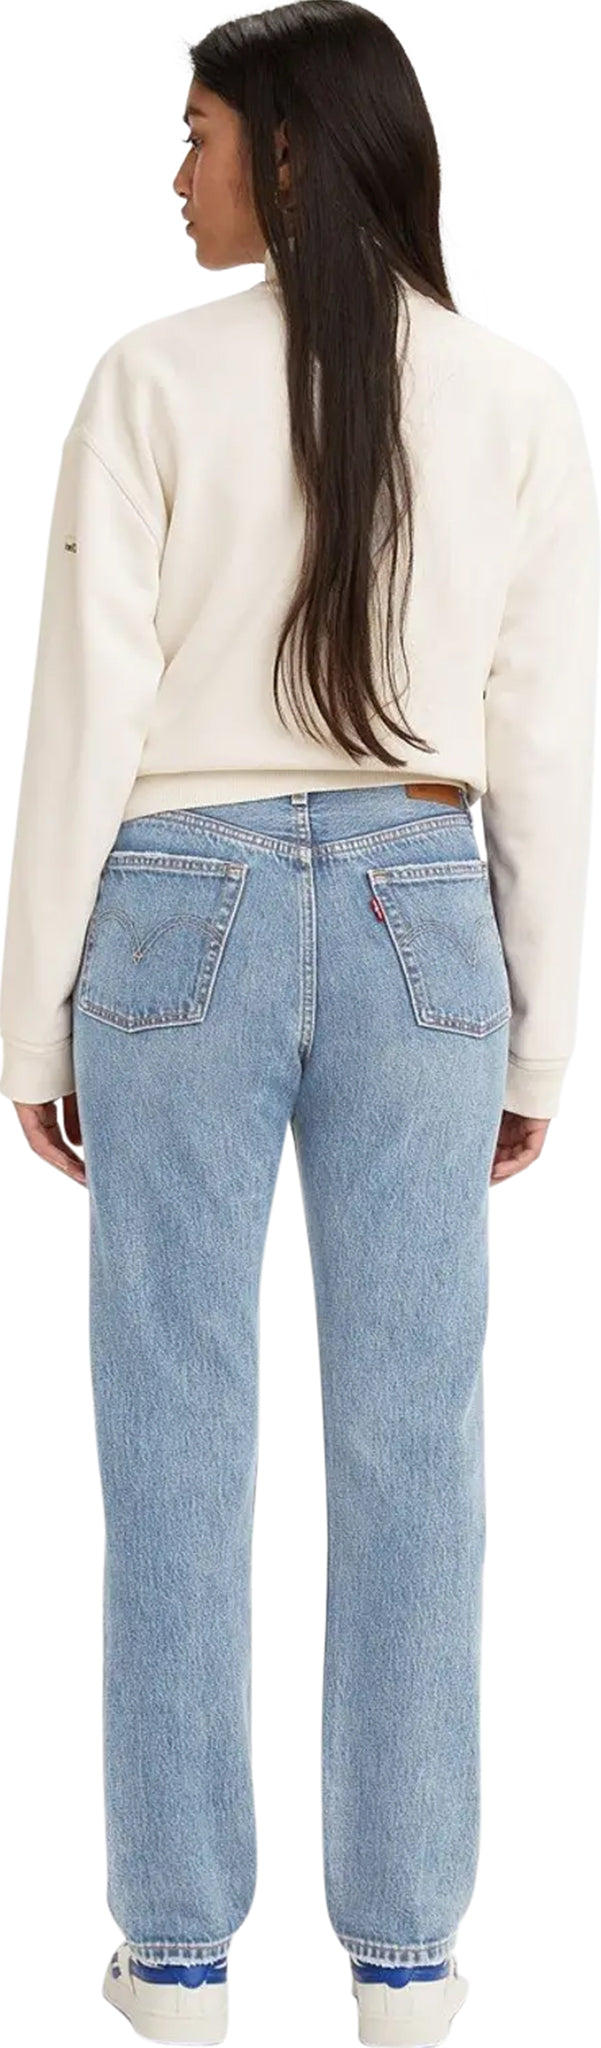 Levi's Ribcage Straight Ankle Jeans - Women's